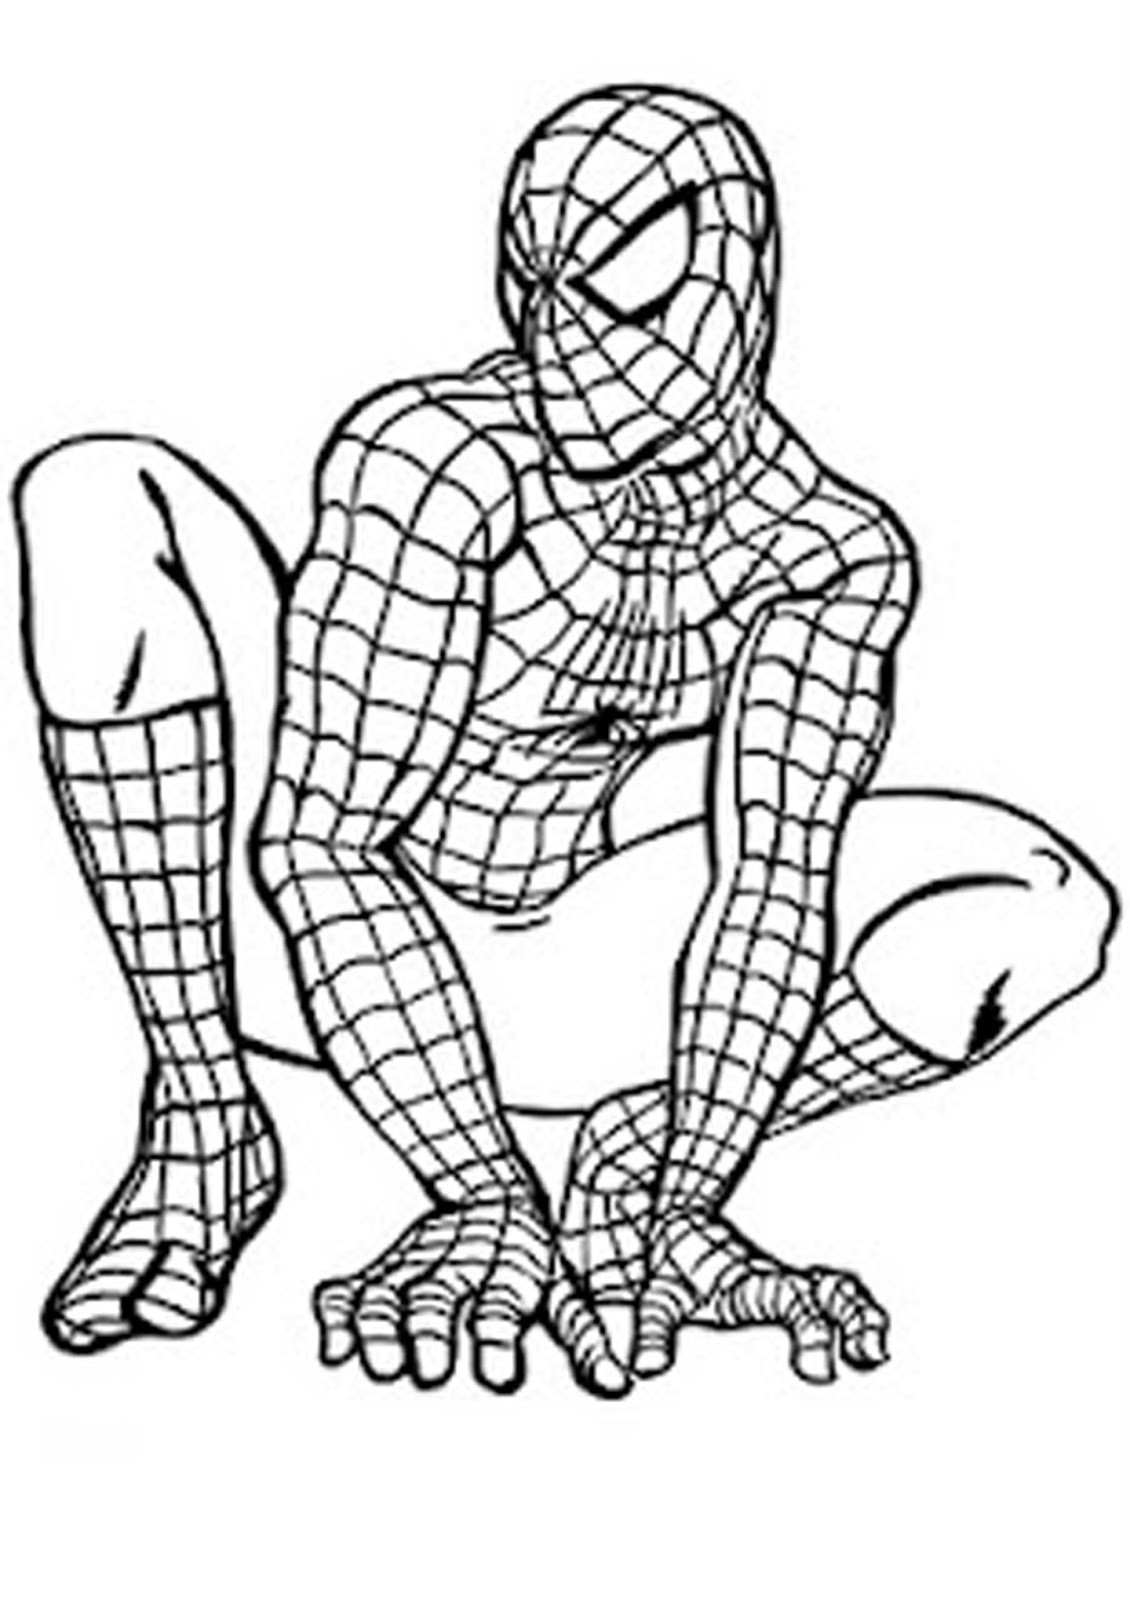 Coloring Pages For Girls And Boys To Print
 Coloring Sheets For Boys Coloring Pages For Kids Coloring